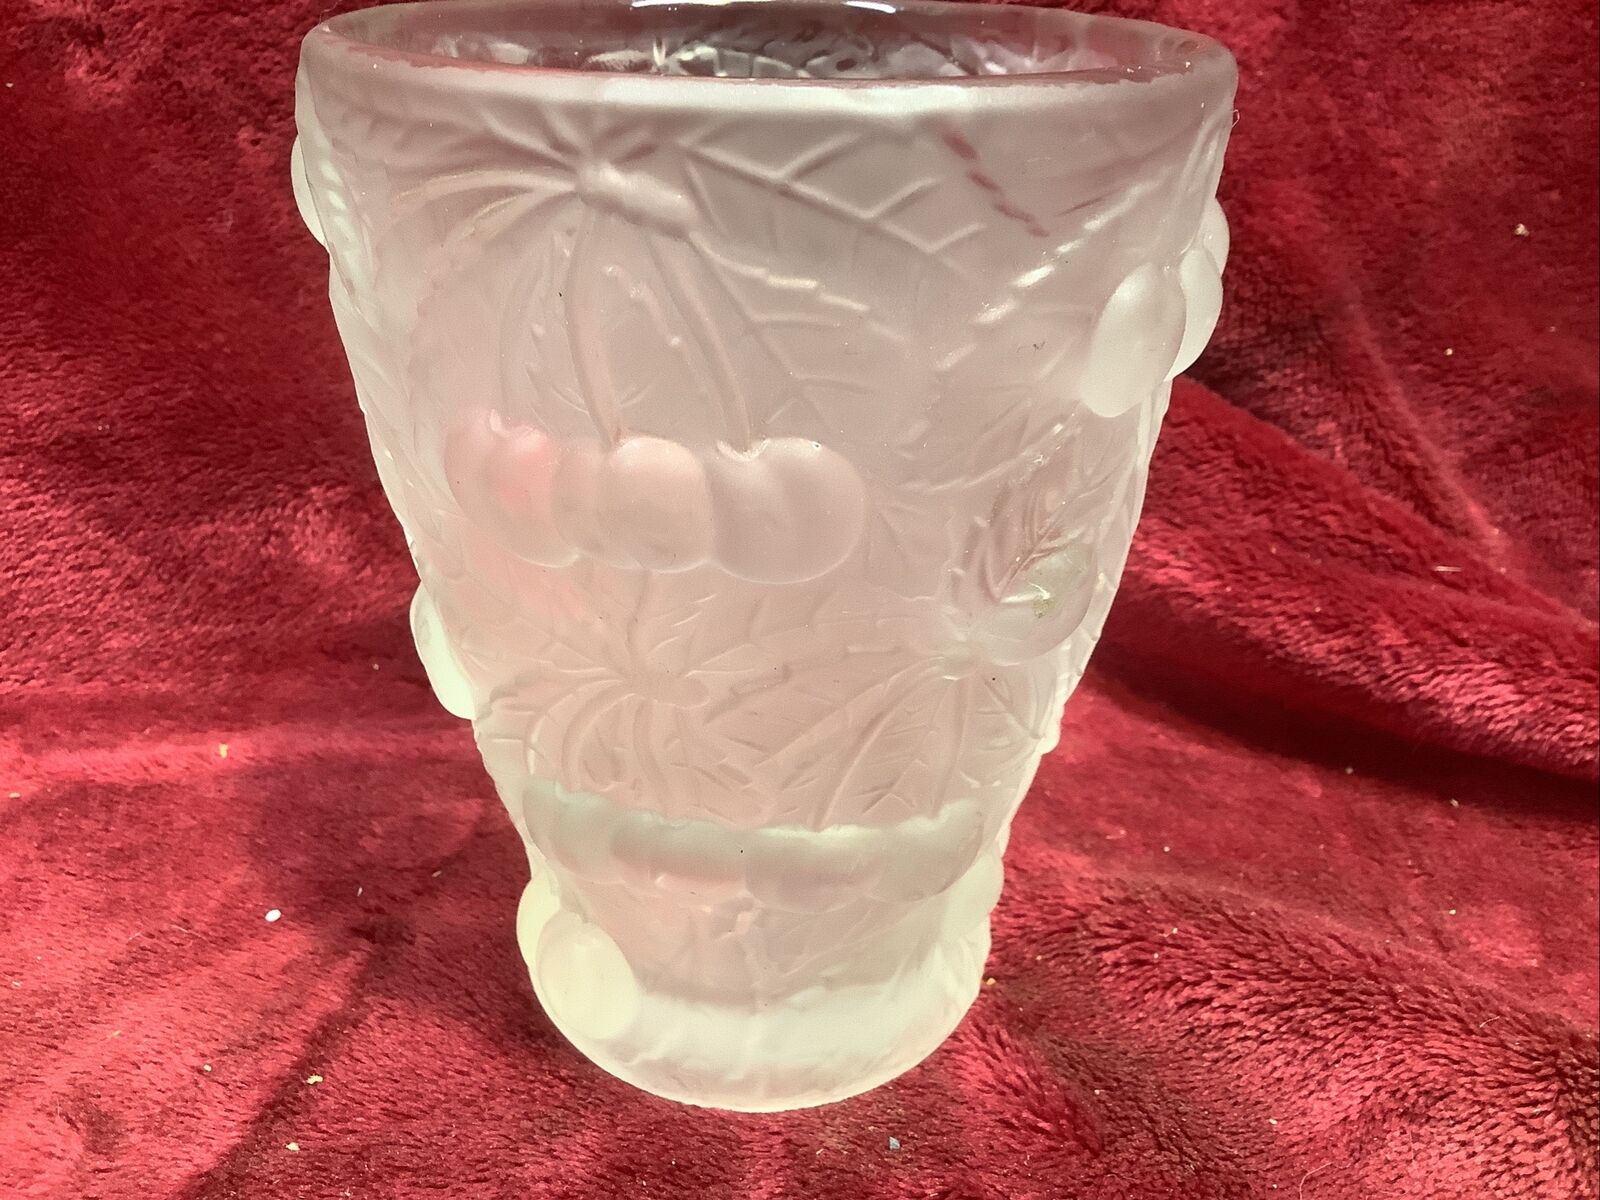 Lalique style 1930s frosted glass vase with cherries and leaves motif 5 1/2” X 4